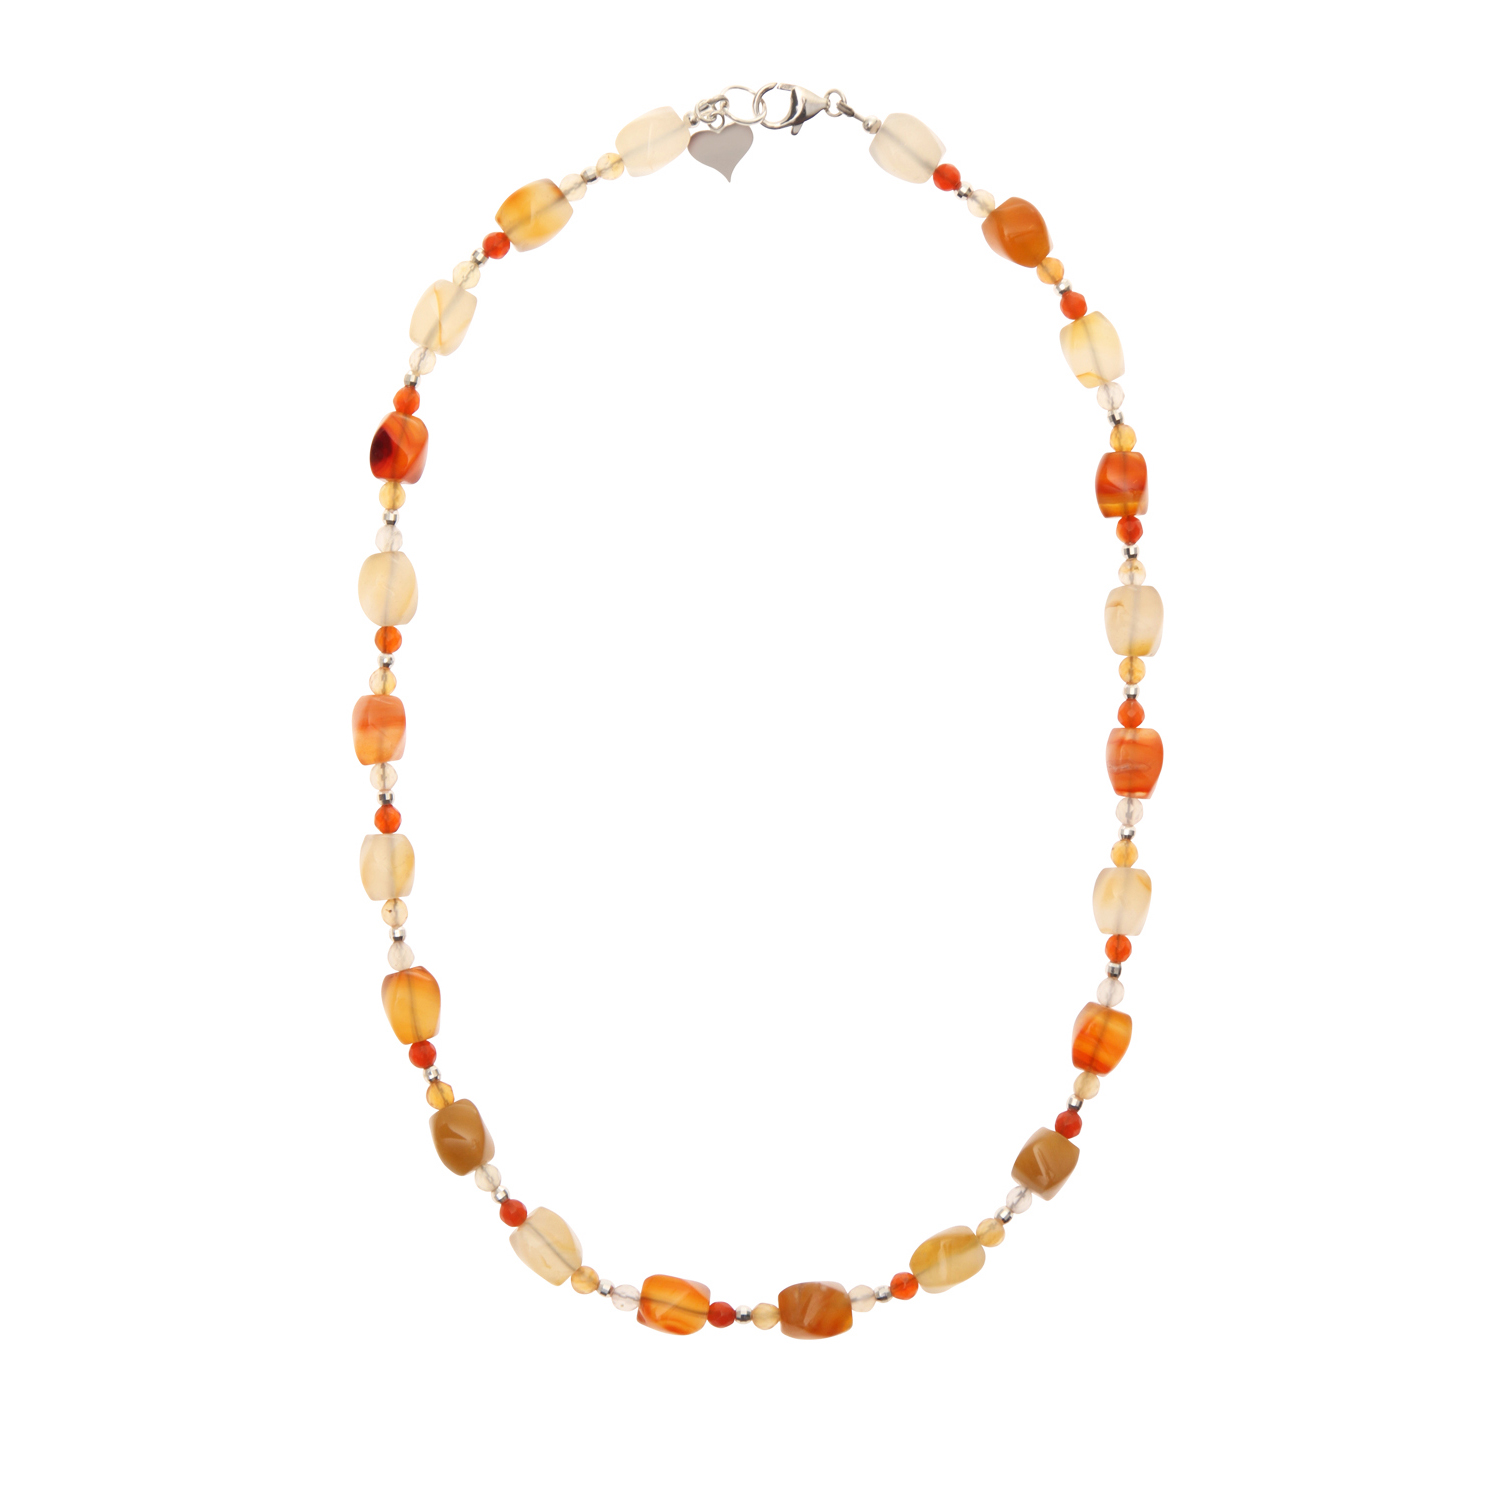 Carnelian Swirl Drum Handmade Necklace In Sterling Silver - Astbury Collection